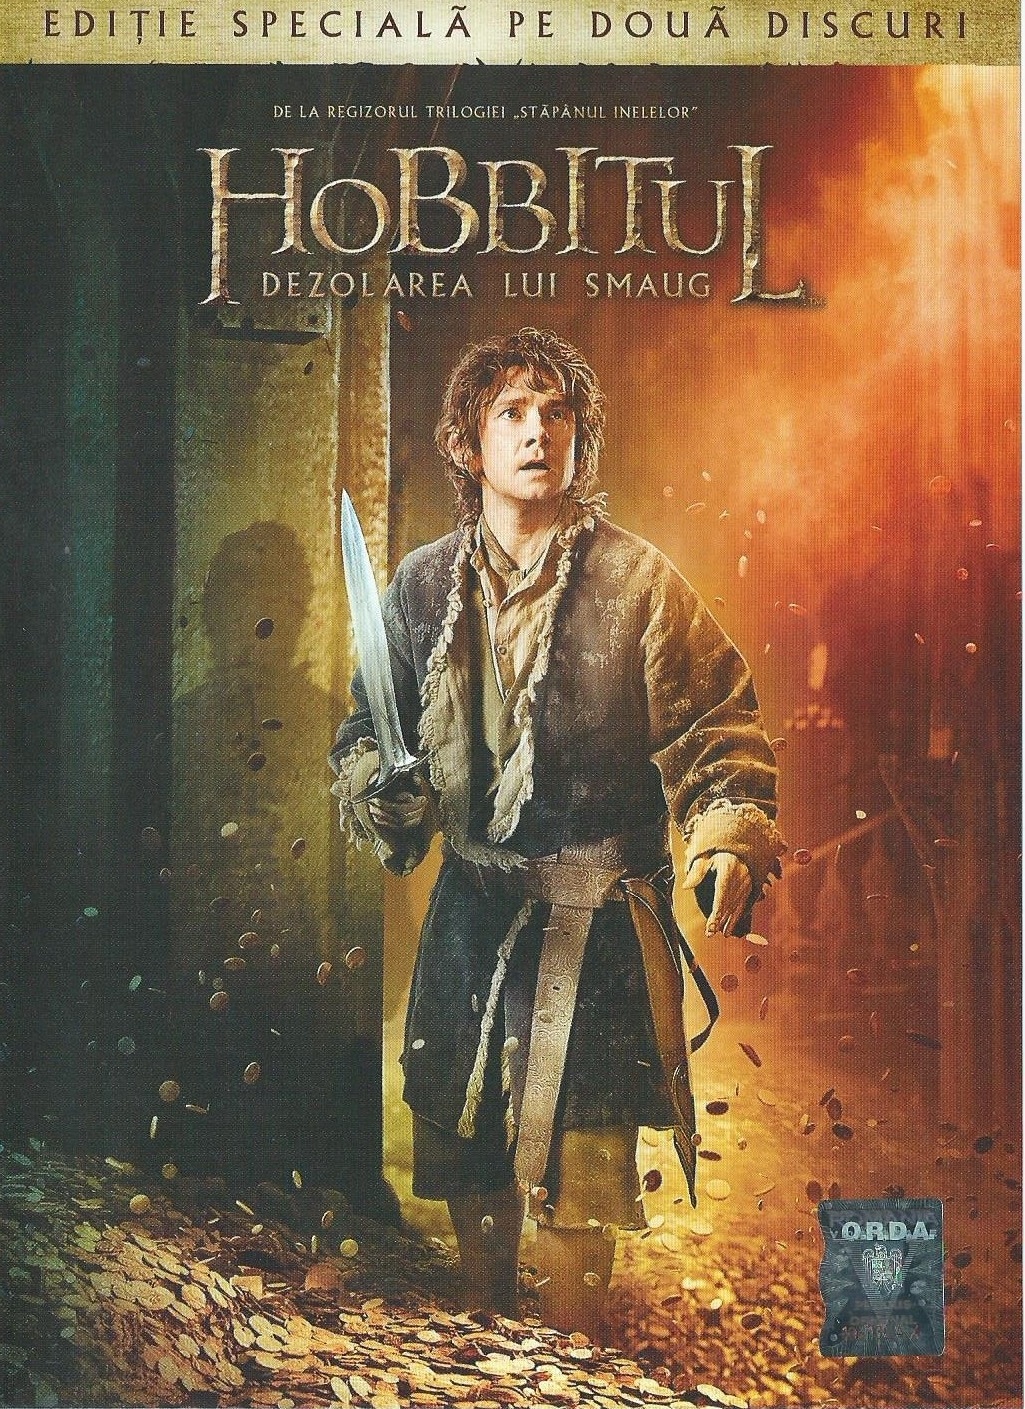 The Hobbit: The Desolation of Smaug download the new version